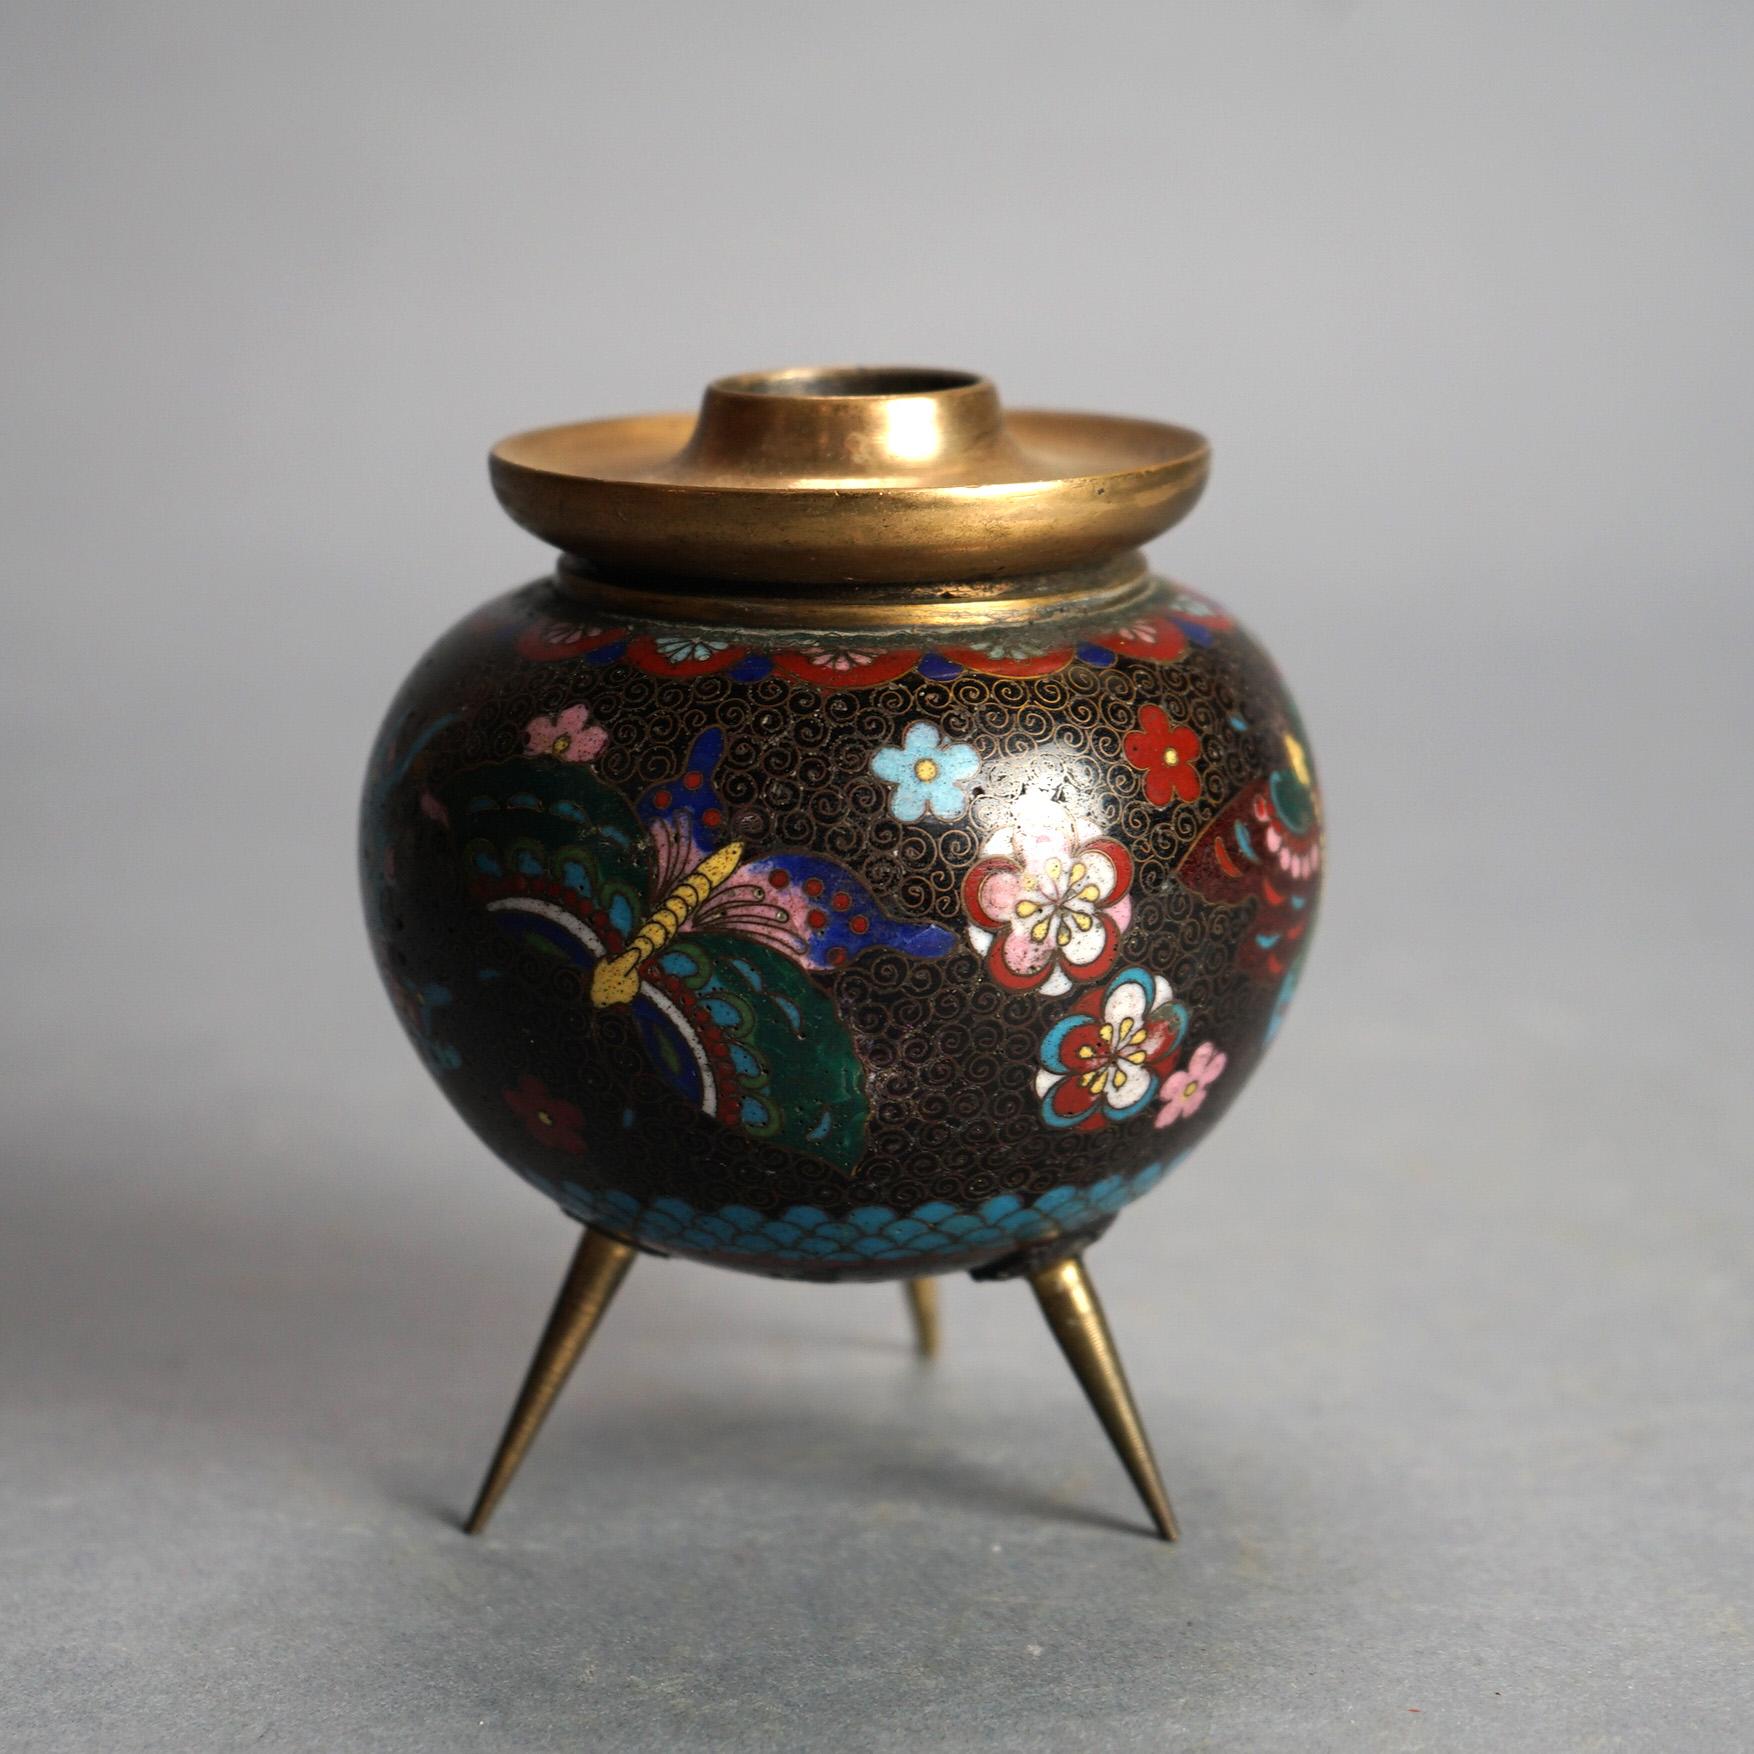 Antique Japanese Cloisonne Enameled Footed Candleholder with Butterflies & Flowers C1920

Measures - 4.5